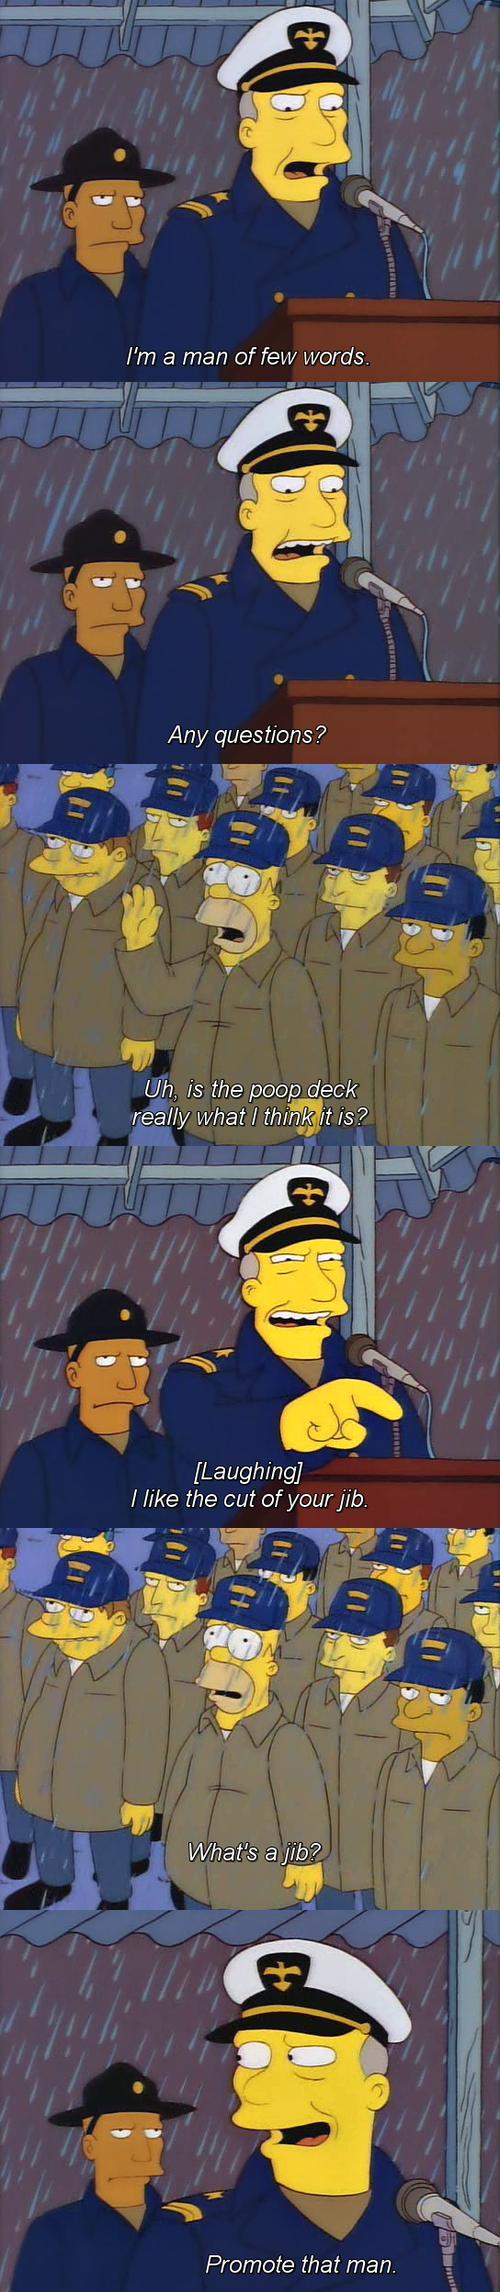 One of the best Simpsons moments.